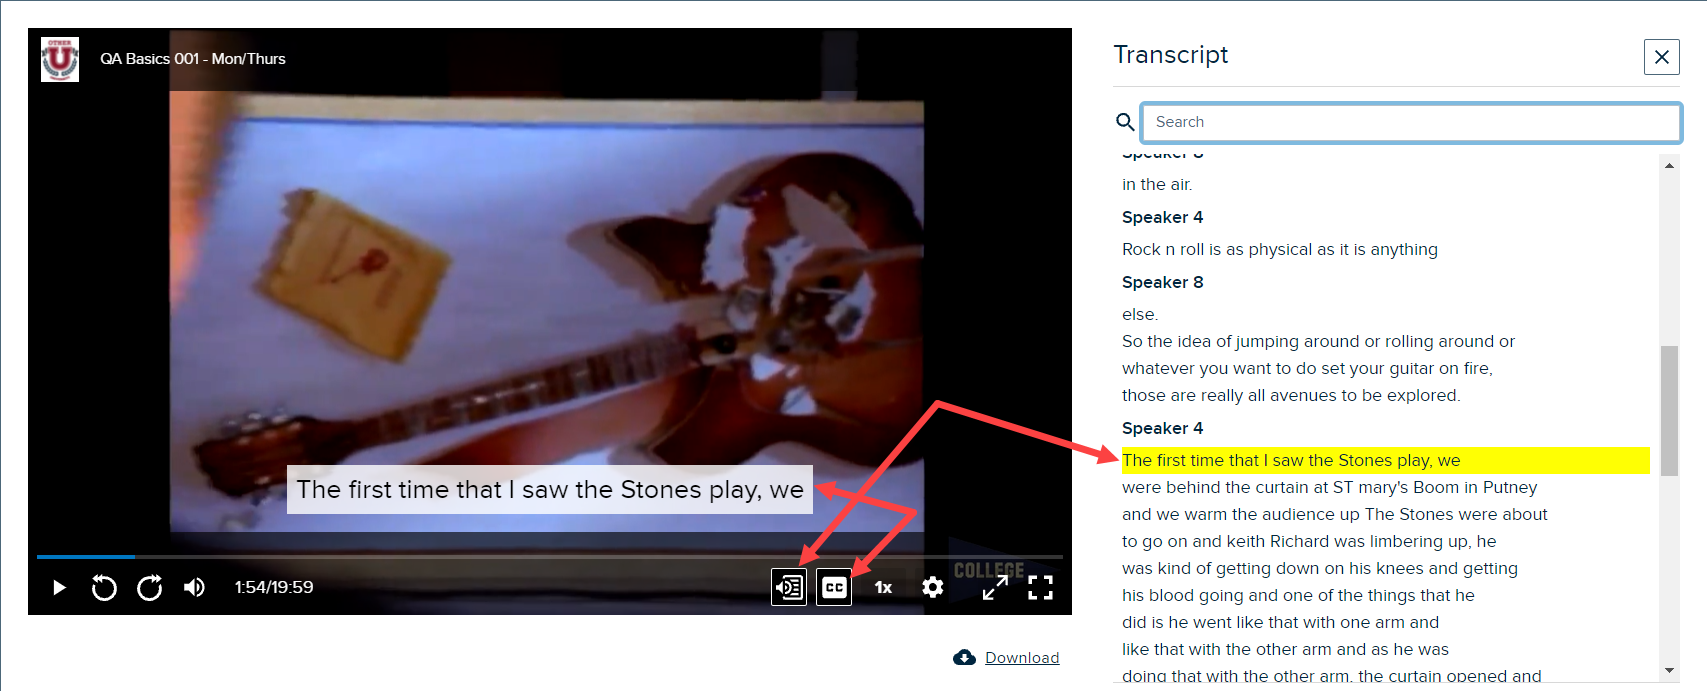 Media Player with both transcripts open and closed captions turned on and visible with icons for showing each identified as described